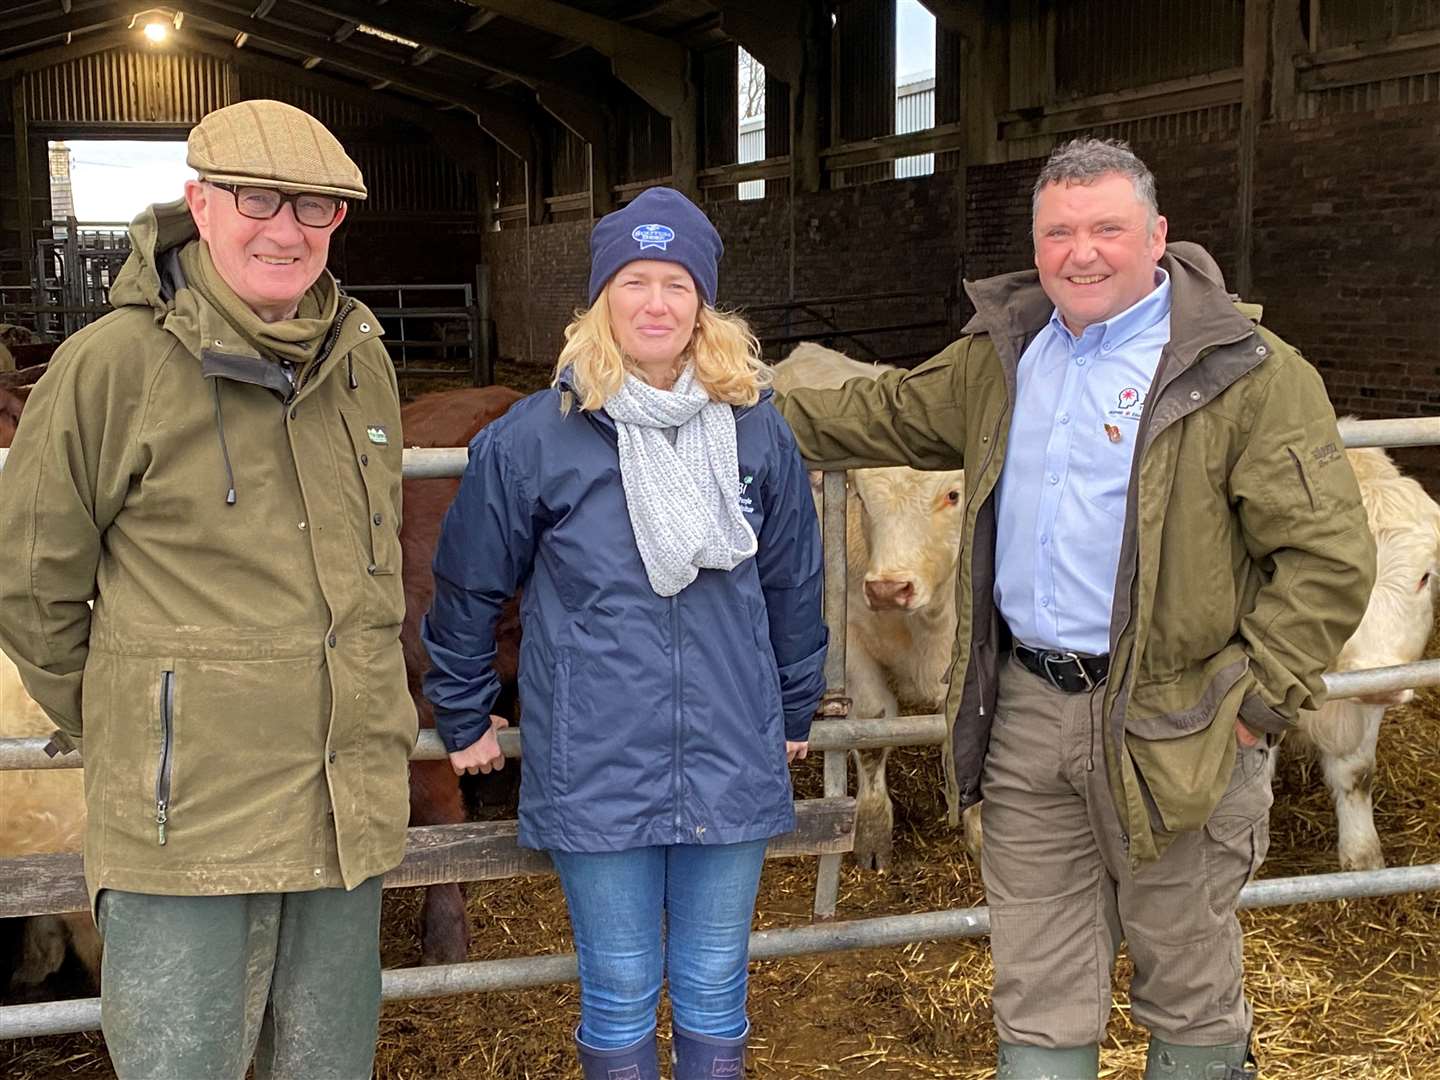 Pictured during a farm visit are, from left, David Leggat, RSABI Trustee, Carol McLaren, RSABI Chief Executive and former Royal Marine Hugh Jones, IED Training Solutions, who will be leading on the delivery of the courses.